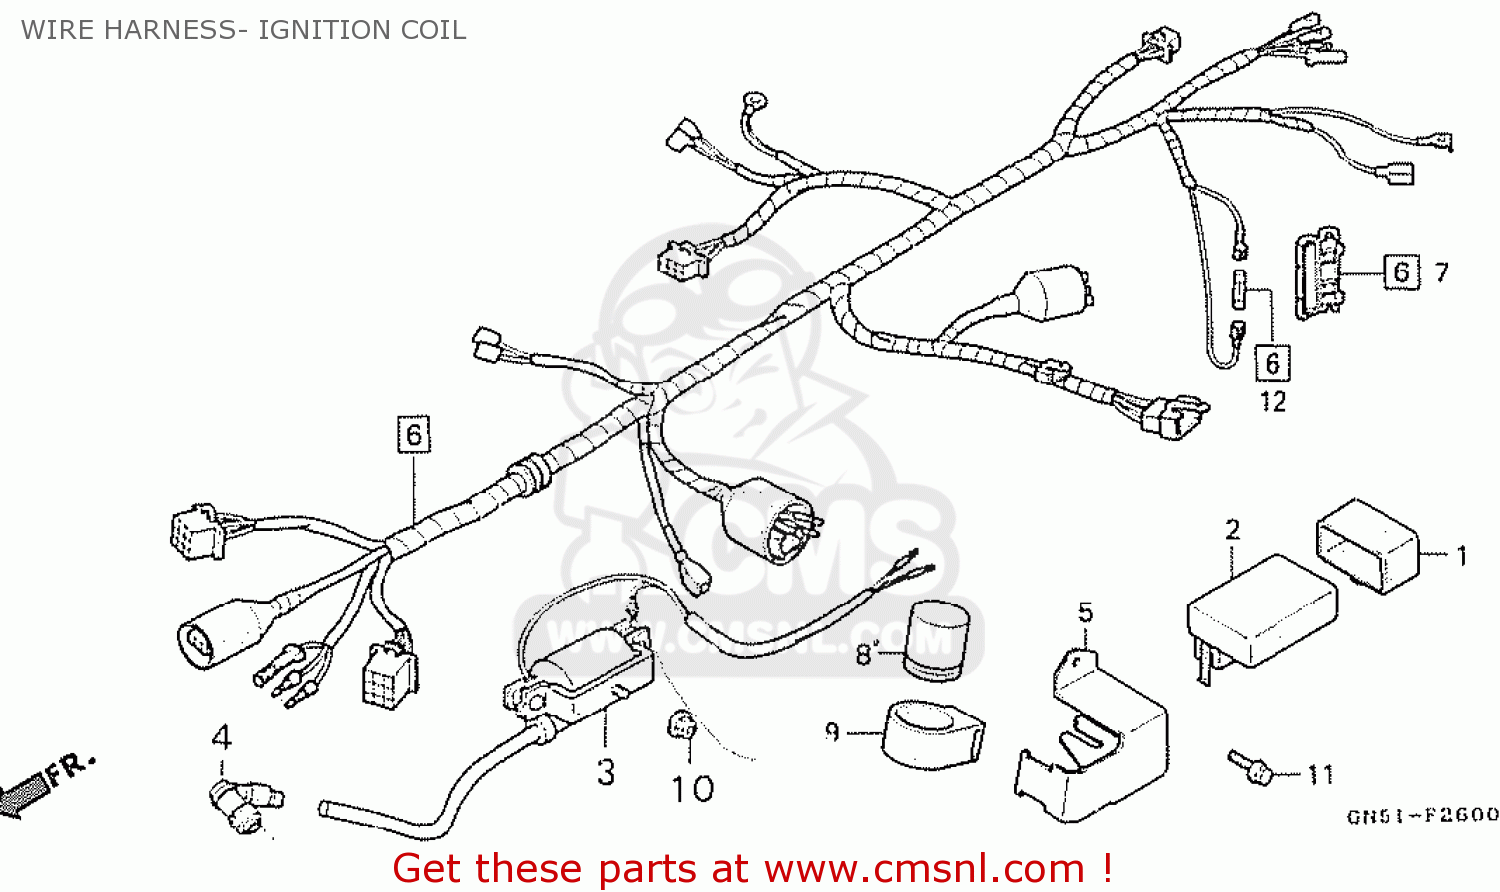 32100GN5840: Harness,wire Honda - buy the 32100-GN5-840 at CMSNL